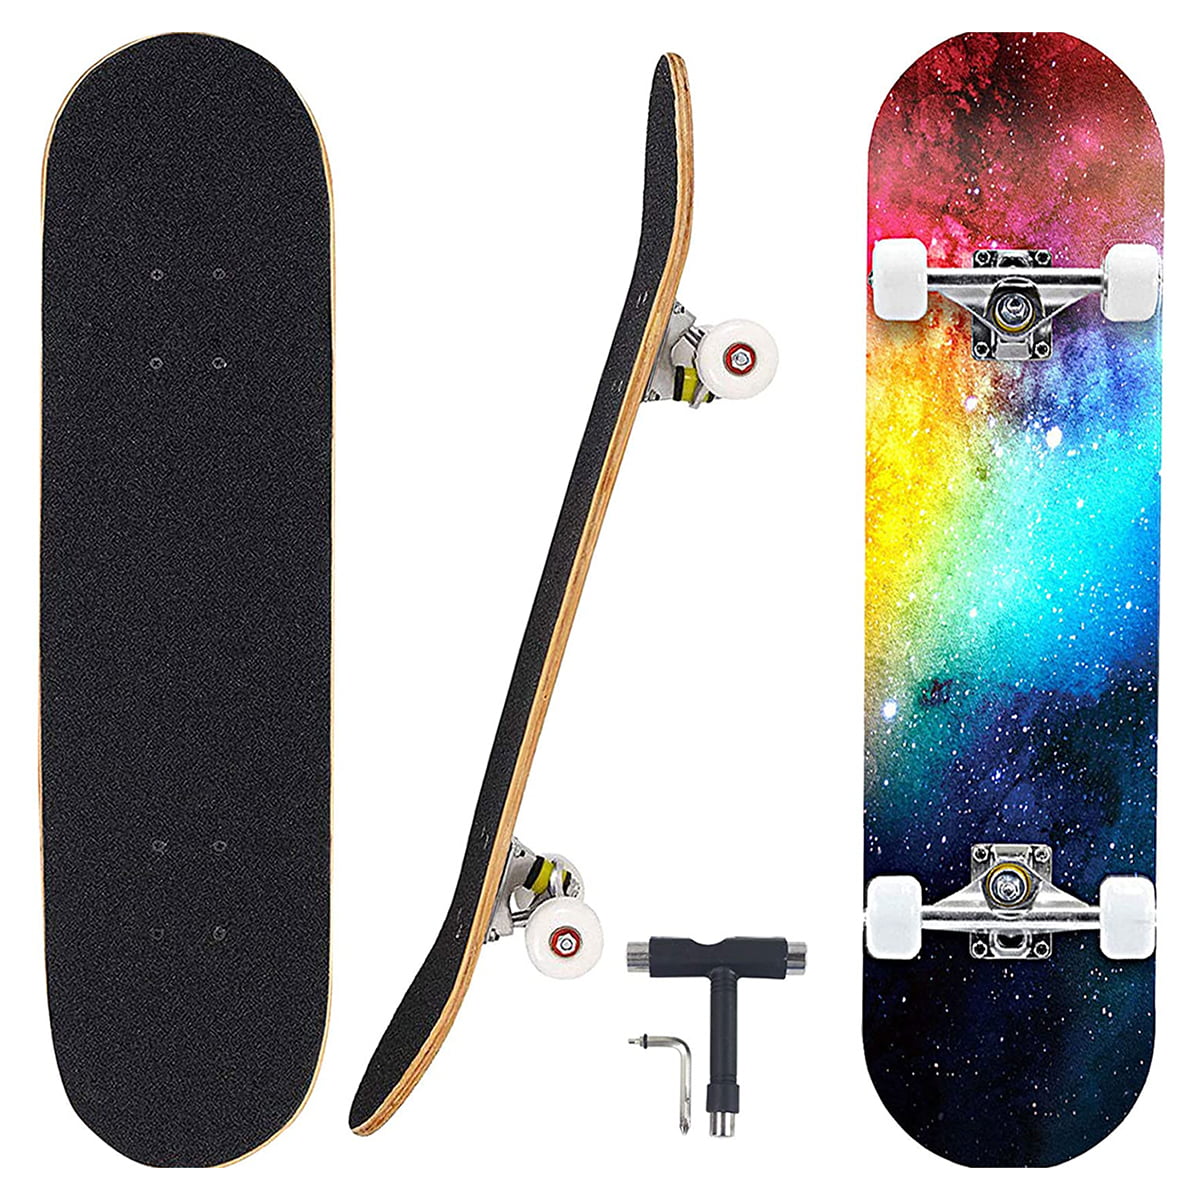 Skateboards for Beginners 7 Layer Canadian B e 123 Complete Skateboard 31 x 8 